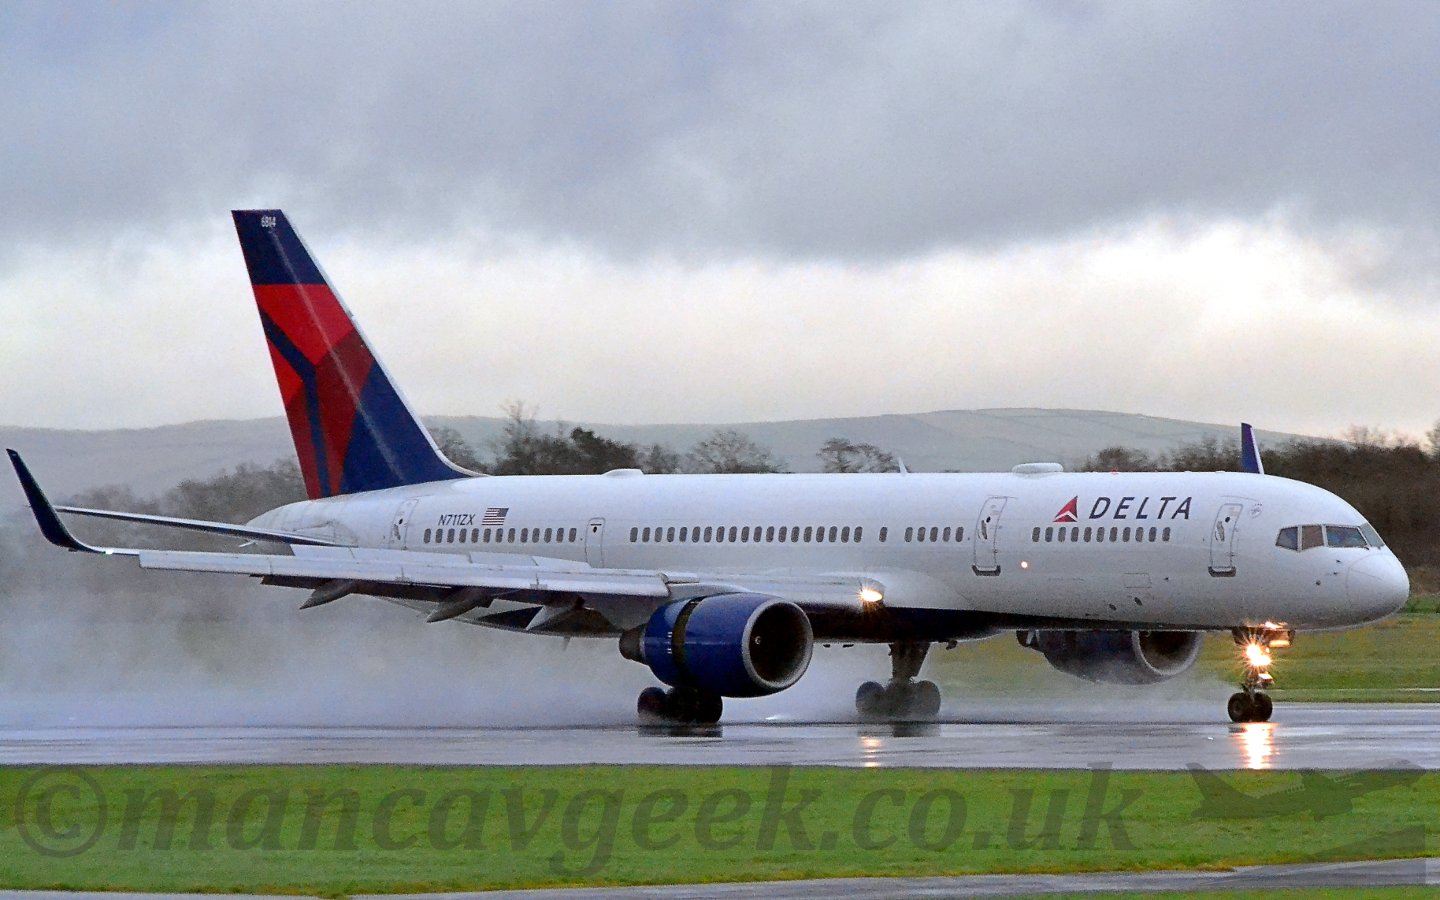 Side view of a twin engined jet airliner throwing up large clouds of moisture as it slows down after landing on a rather damp runway, moving from left to right. The plane is mostly white, with black "Delta" titles next to a red triangle on the upper forward fuselage. The tail is dark blue, with ared triangle pointing North-East. The engines are also dark blue, with the thrust reversers open, helping to slow the plane. A pair of bright lights are shining on the nosewheel leg. In the background, trees mark the airfield perimeter, with rolling hills in the far distance, under a grey sky.